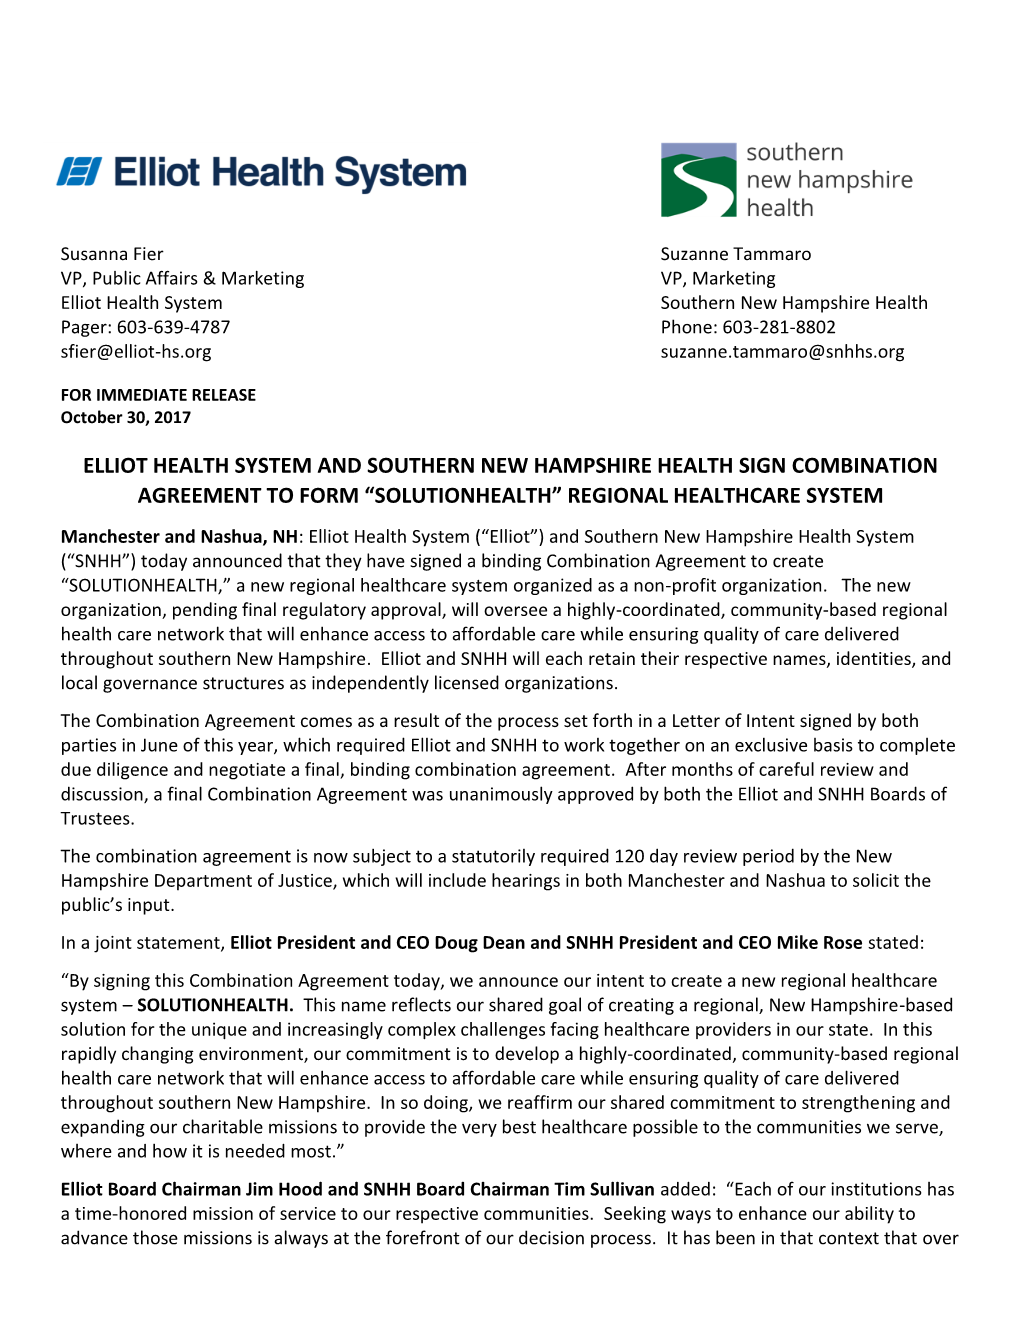 Elliot Health System and Southern New Hampshire